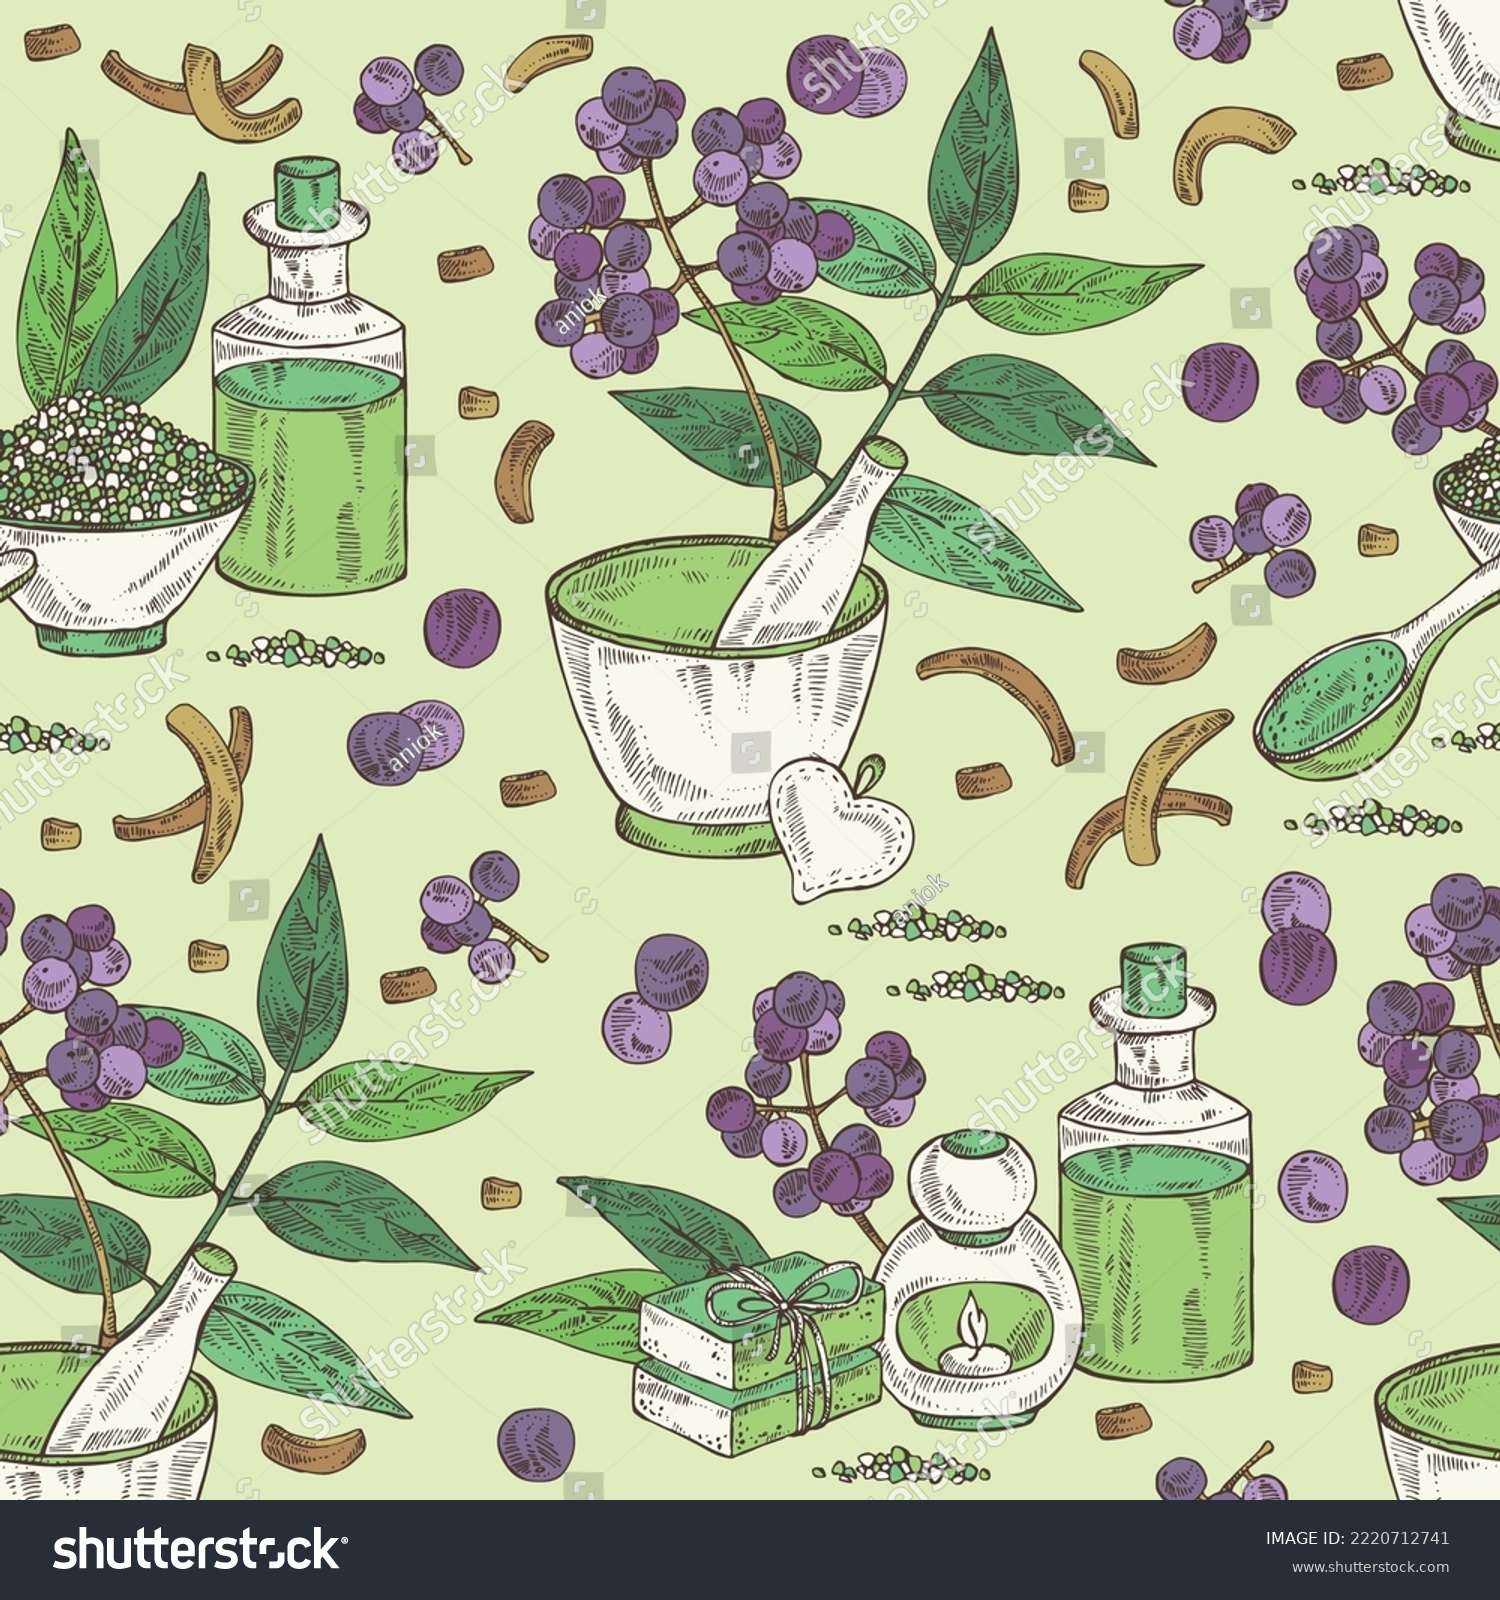 SVG of Seamless pattern with amur cork tree: amur cork berries, plant and amur cork tree bark. Phellodendron amurense. Oil, soap and bath salt . Cosmetics and medical plant. Vector hand drawn illustrat svg